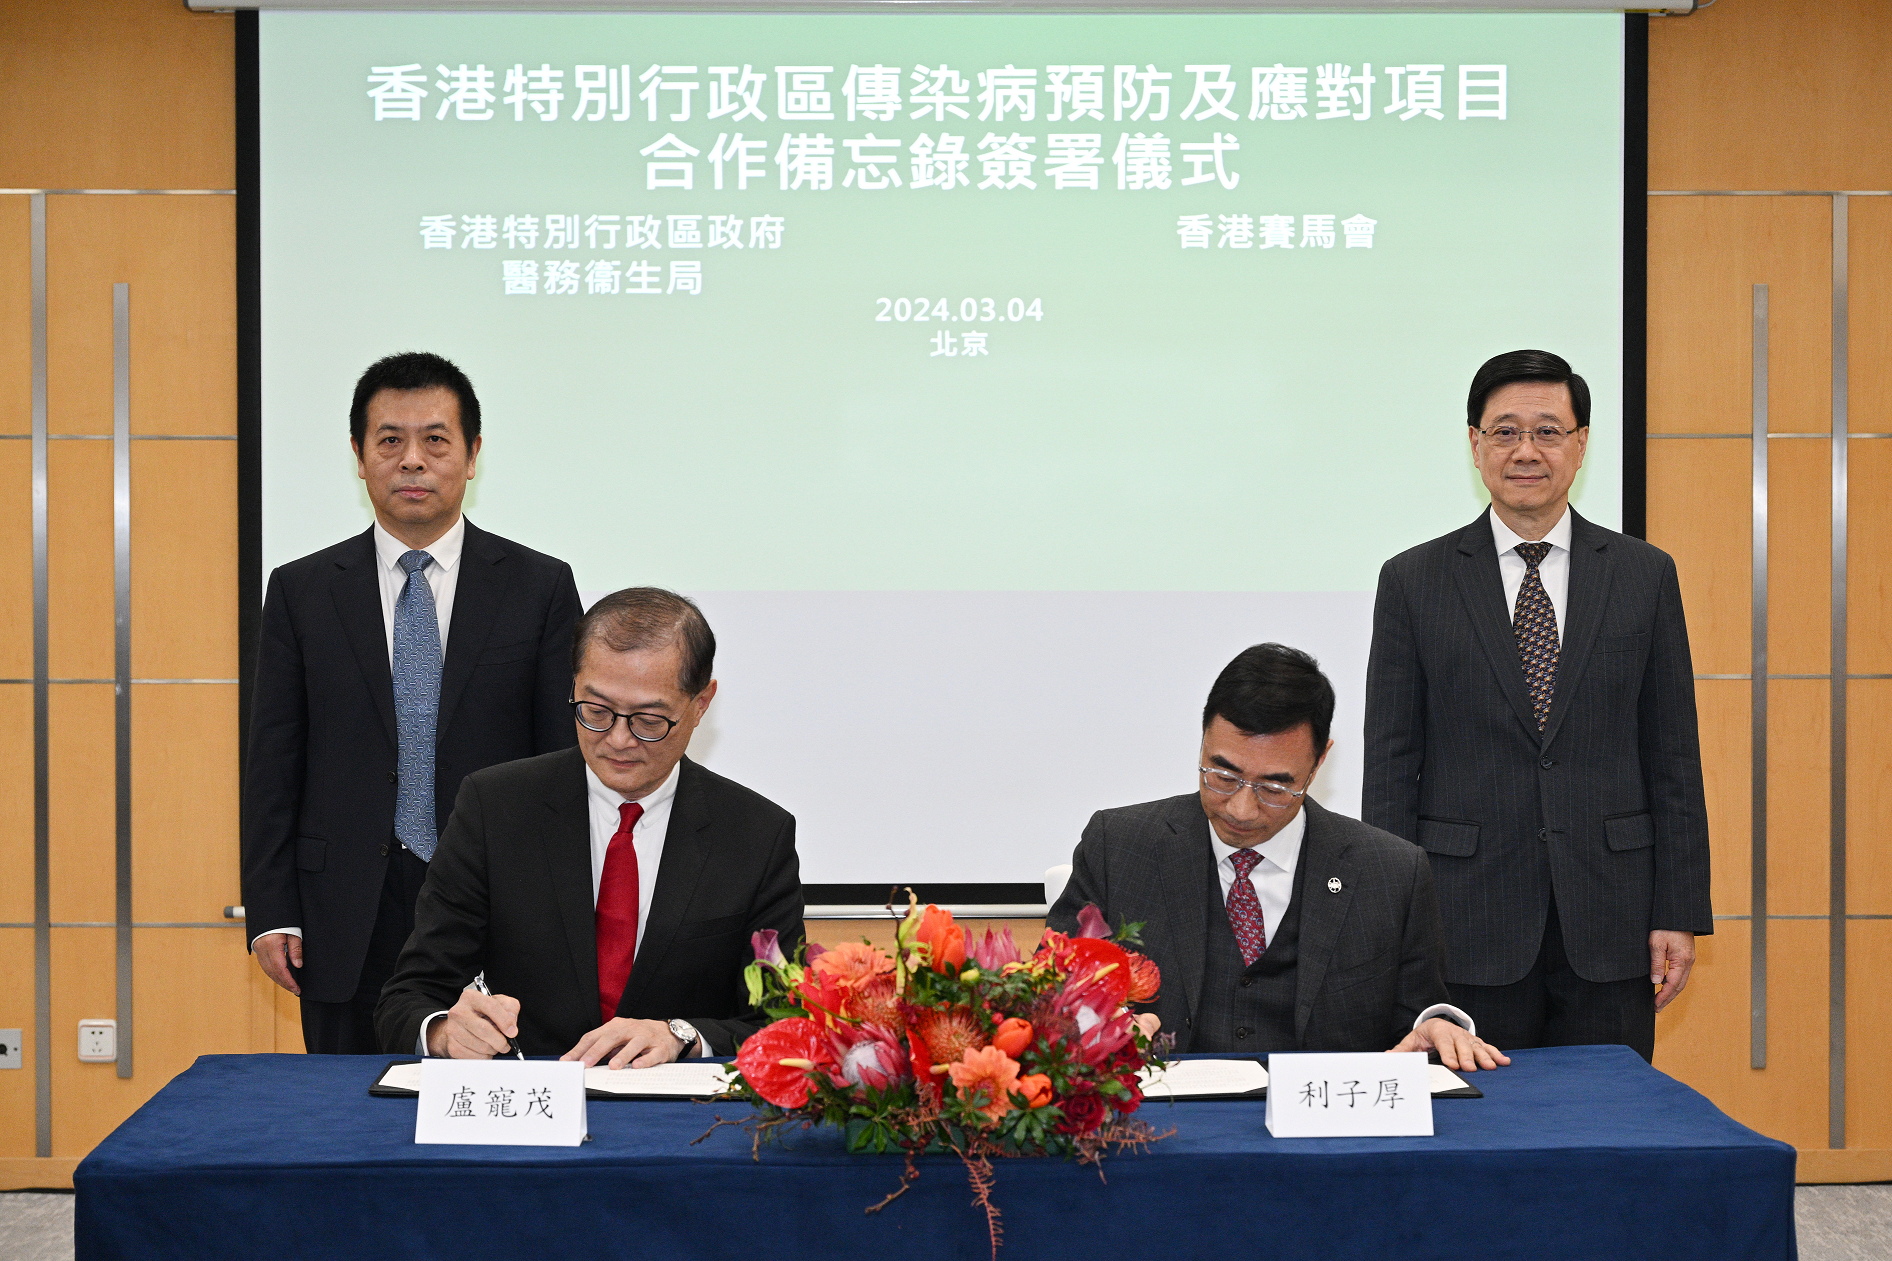 The Chief Executive, Mr John Lee, attended a signing ceremony of co-operation documents in Beijing today (March 4), witnessing the signing of co-operation documents between the Hong Kong Jockey Club and the National Health Commission (NHC) and the Health Bureau respectively on strengthening the training of healthcare talent and commencing projects on the prevention and response against local communicable diseases. Photo shows Mr Lee (back row, right) and Vice-minister of the NHC Mr Lei Haichao (back row, left) witnessing the signing of the Memorandum of Understanding Between the Health Bureau of the Government of the HKSAR and The Hong Kong Jockey Club on a Local Programme for Infectious Disease Prevention and Preparedness by the Secretary for Health, Professor Lo Chung-mau (front row, left), and the Chairman of the Hong Kong Jockey Club, Mr Michael Lee (front row, right).